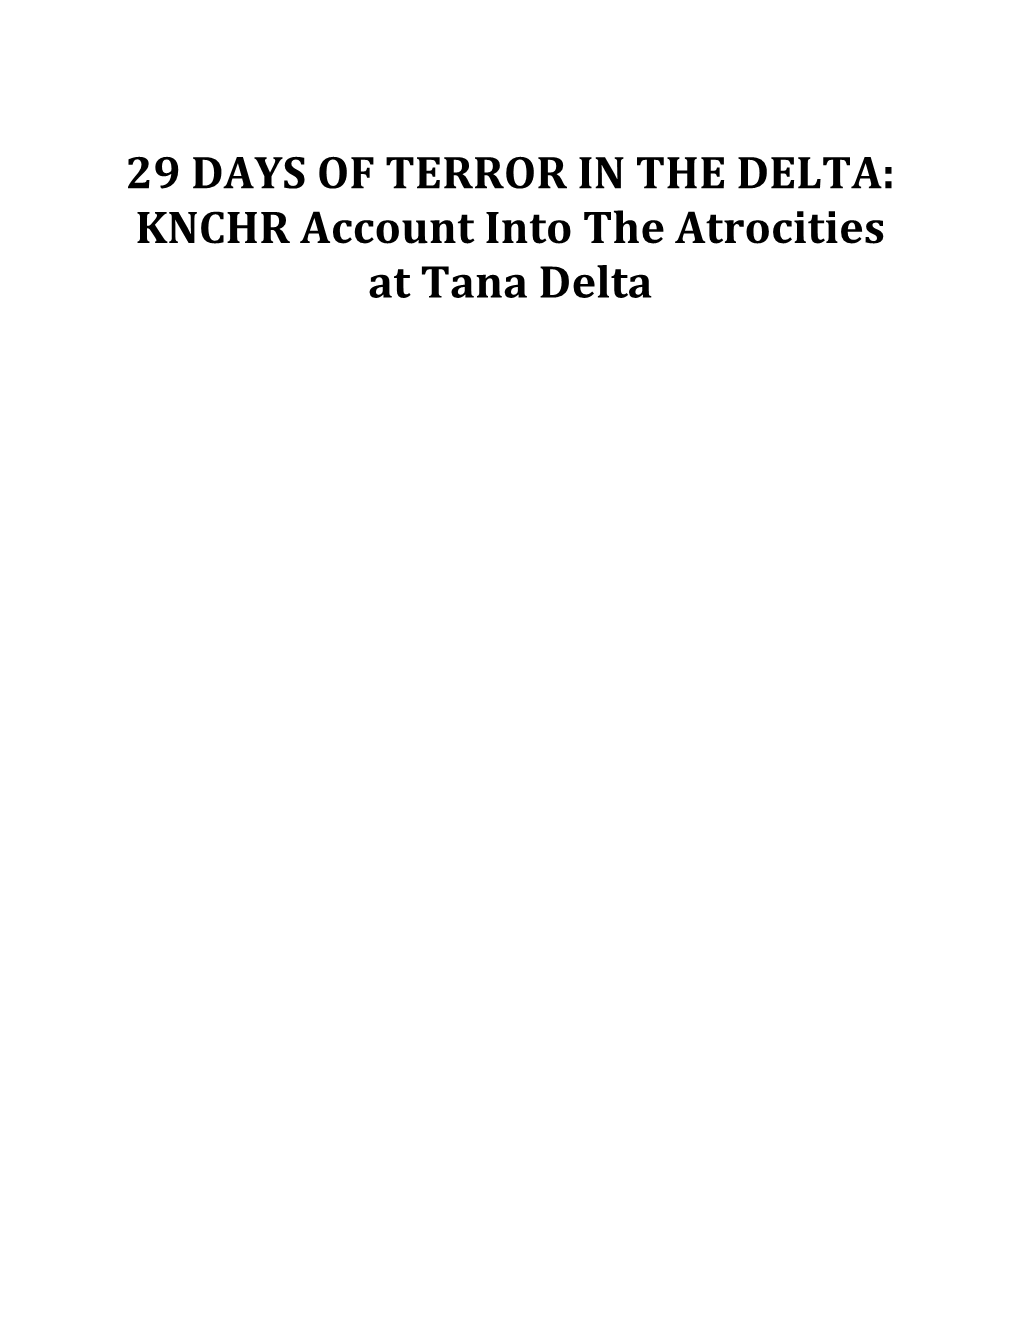 29 DAYS of TERROR in the DELTA: KNCHR Account Into the Atrocities at Tana Delta